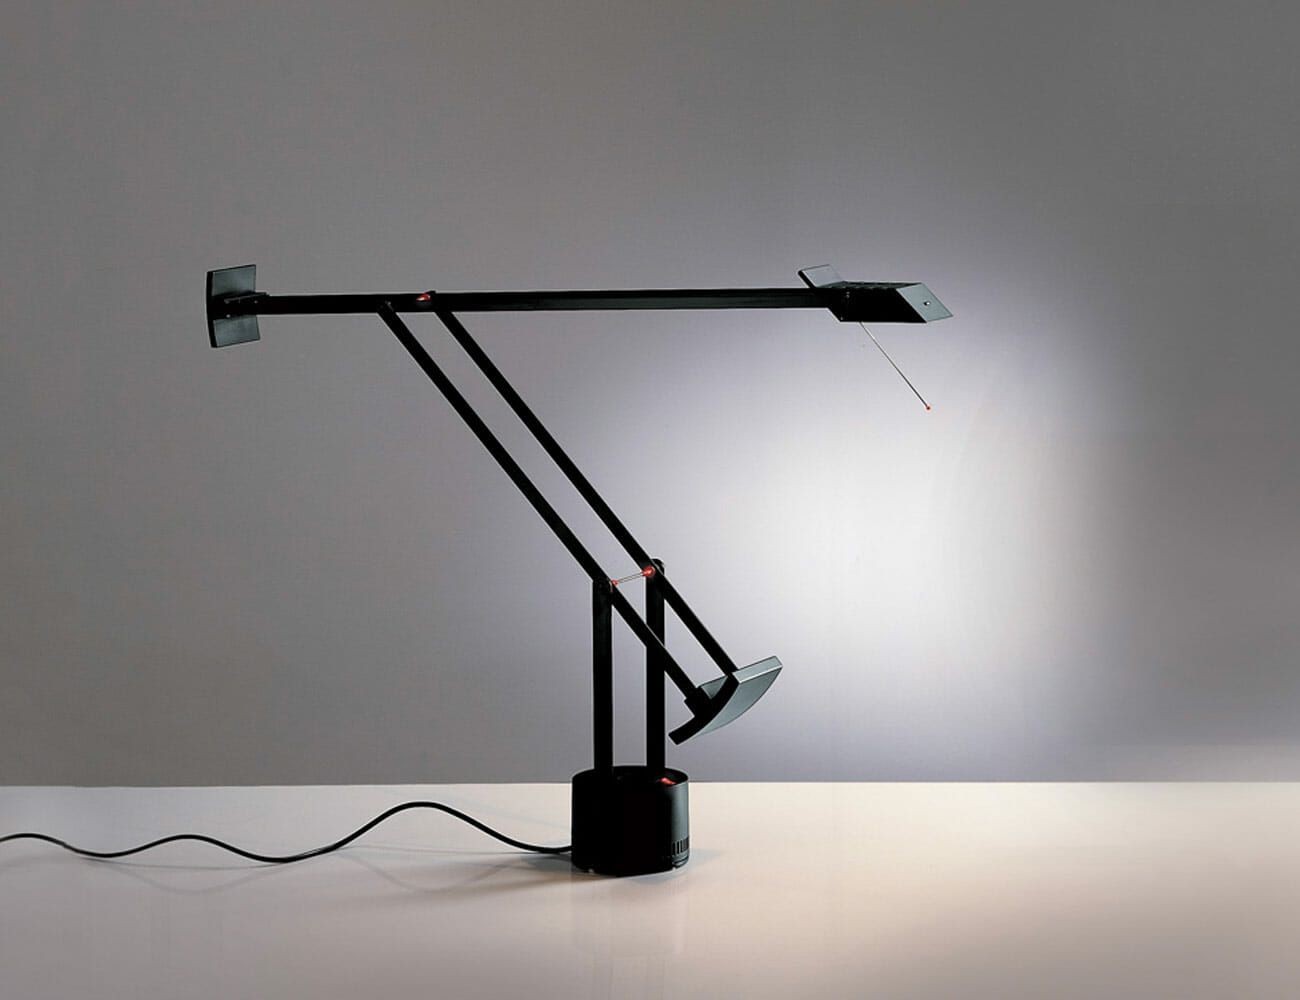 The 20 Best Desk Lamps to Buy in 2020